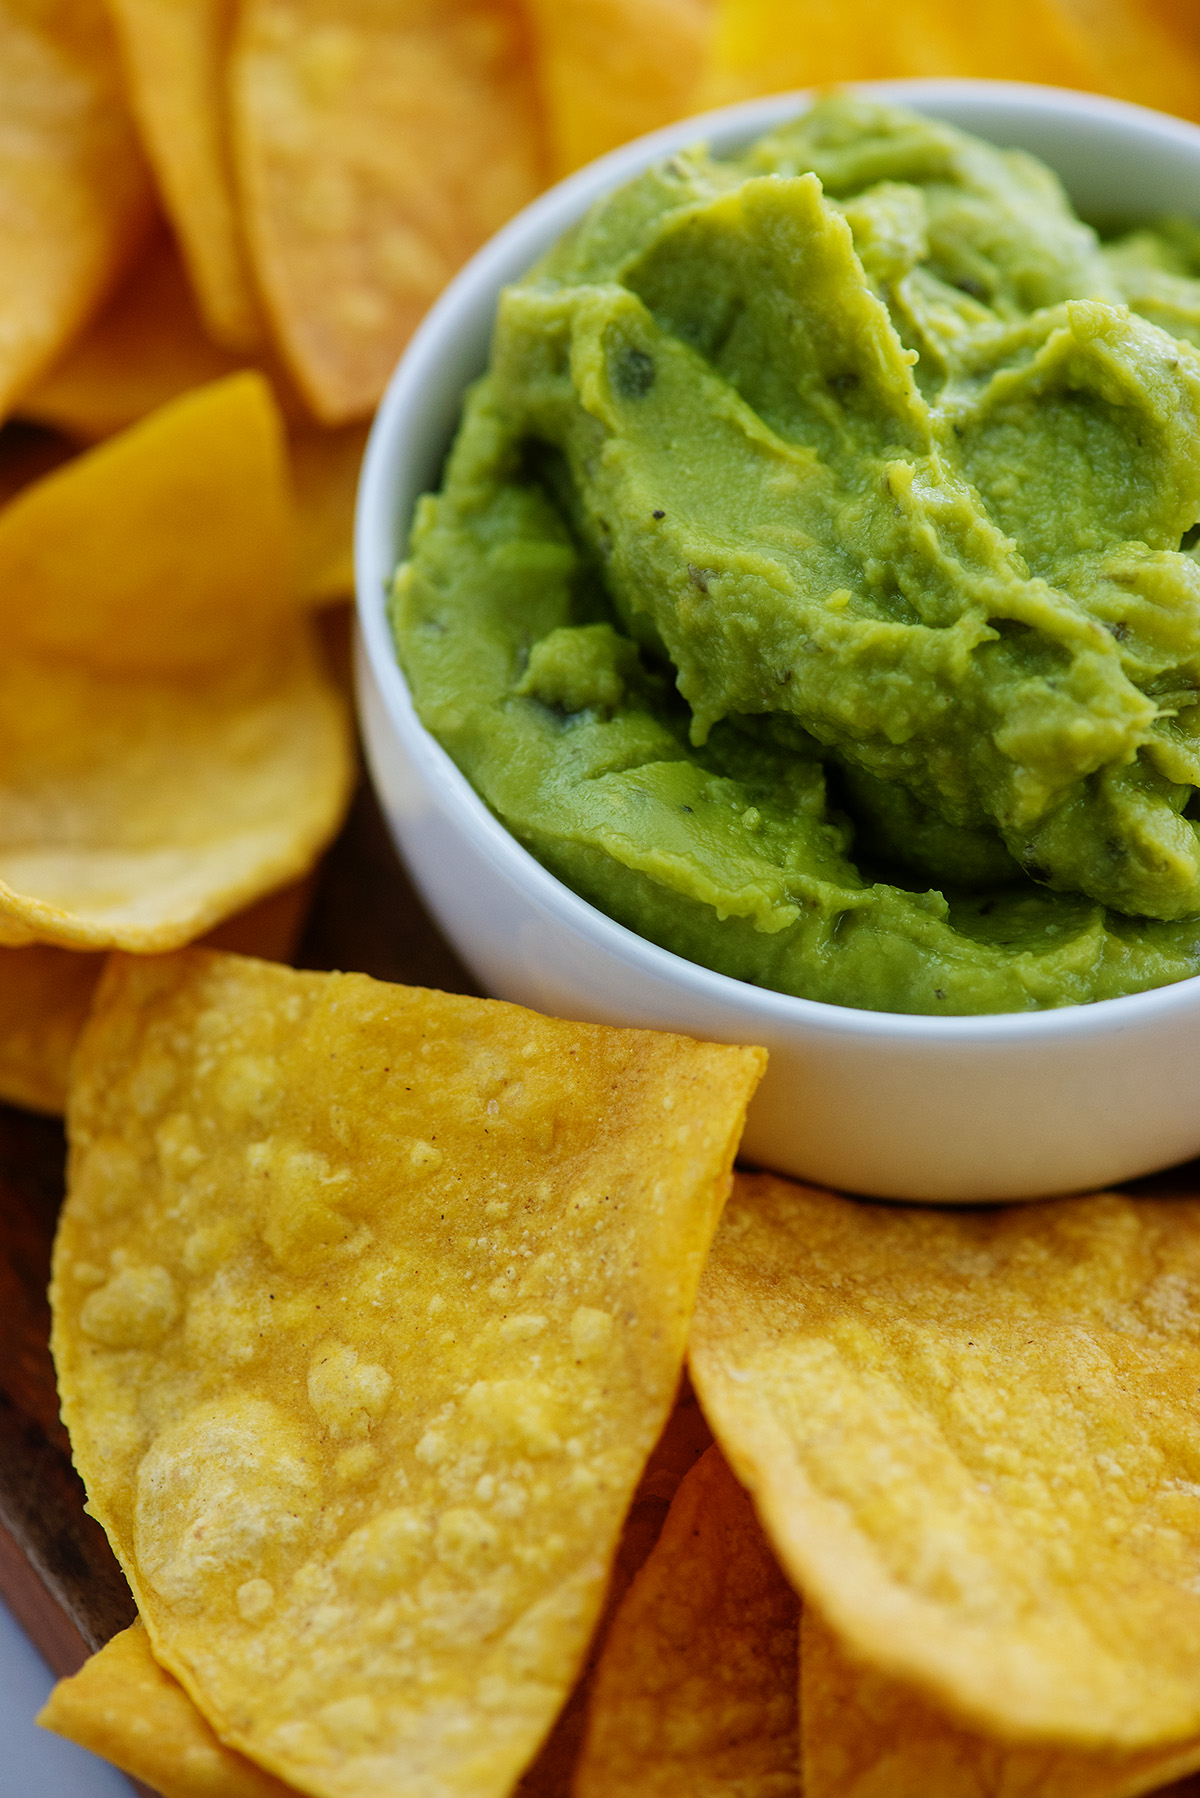 A cup of guacamole surrounded by tortilla chips